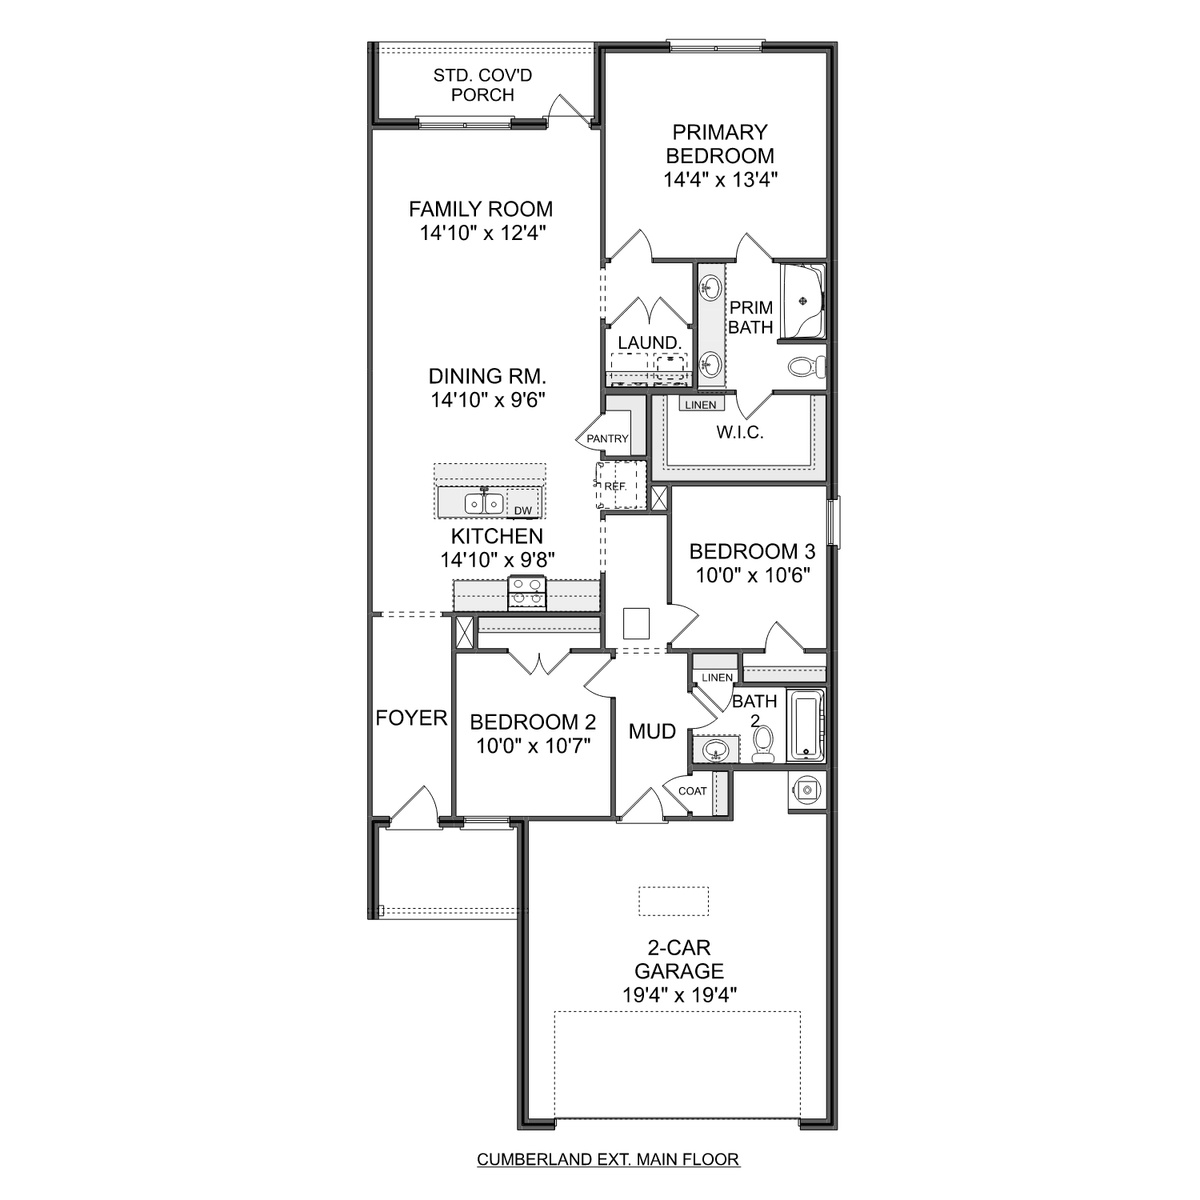 1 - The Cumberland buildable floor plan layout in Davidson Homes' Hollon Meadow community.